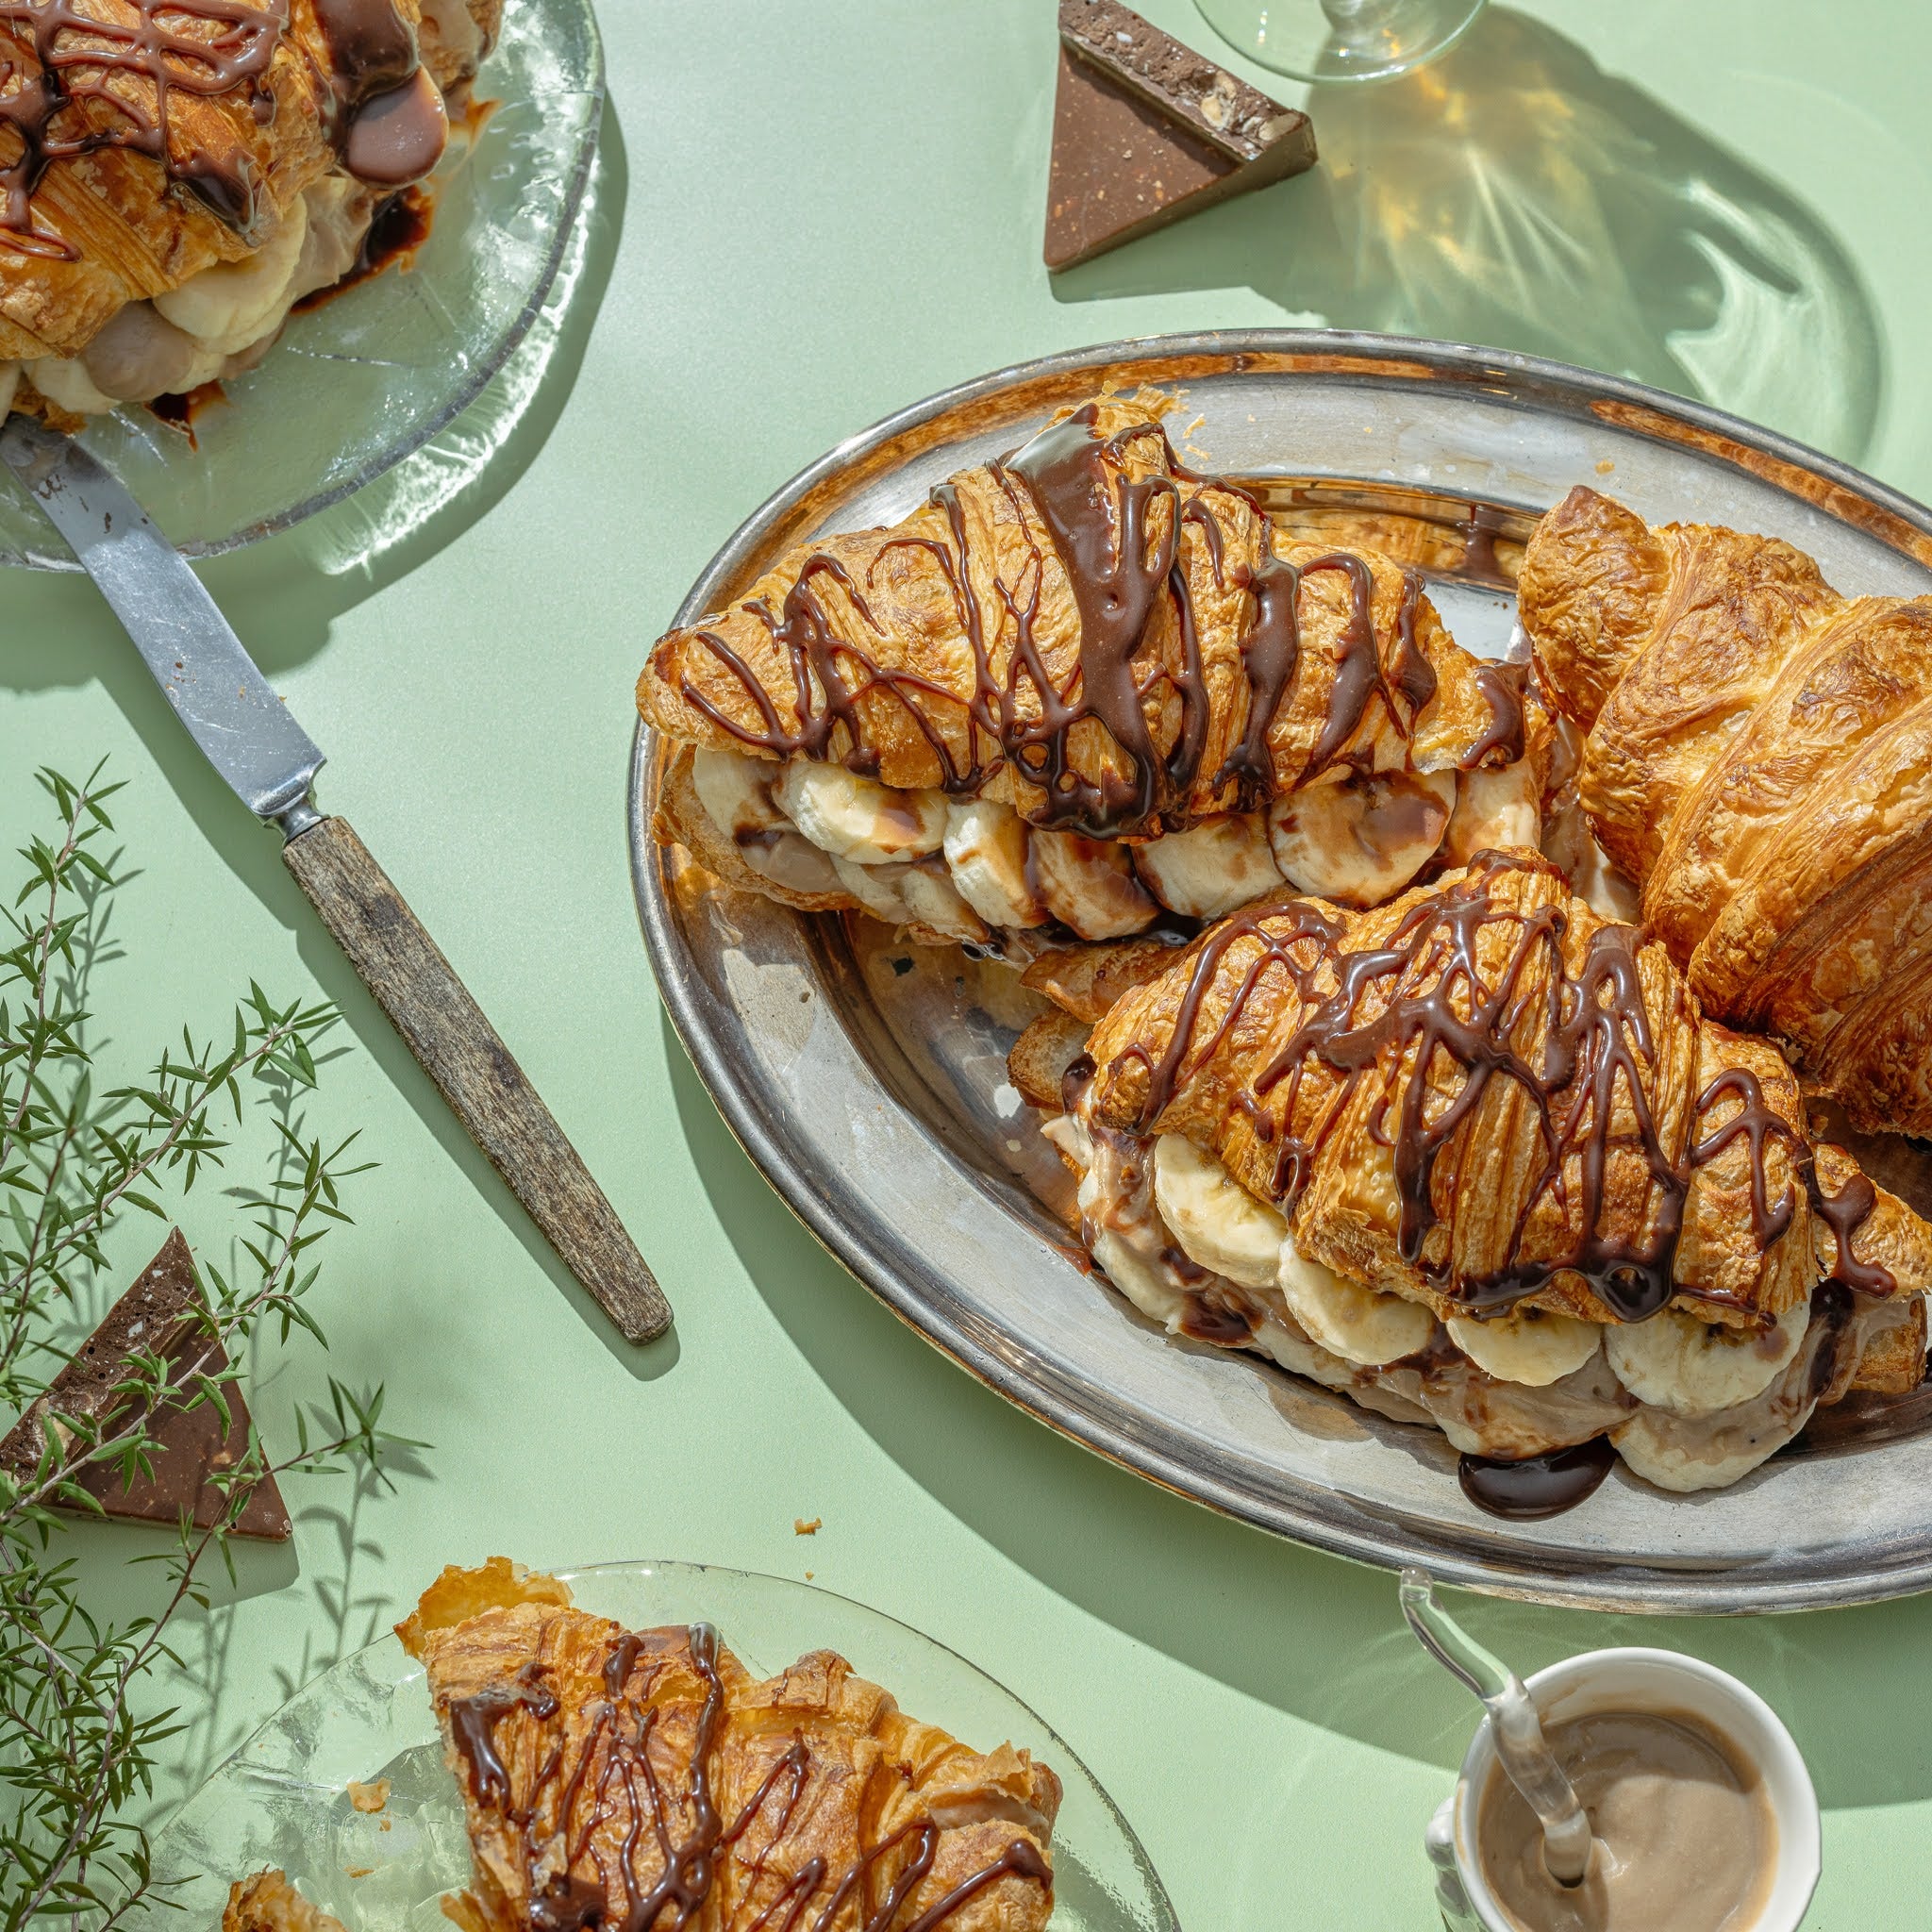 Croissants turned into dessert with chocolate banana caramel on a green table setting